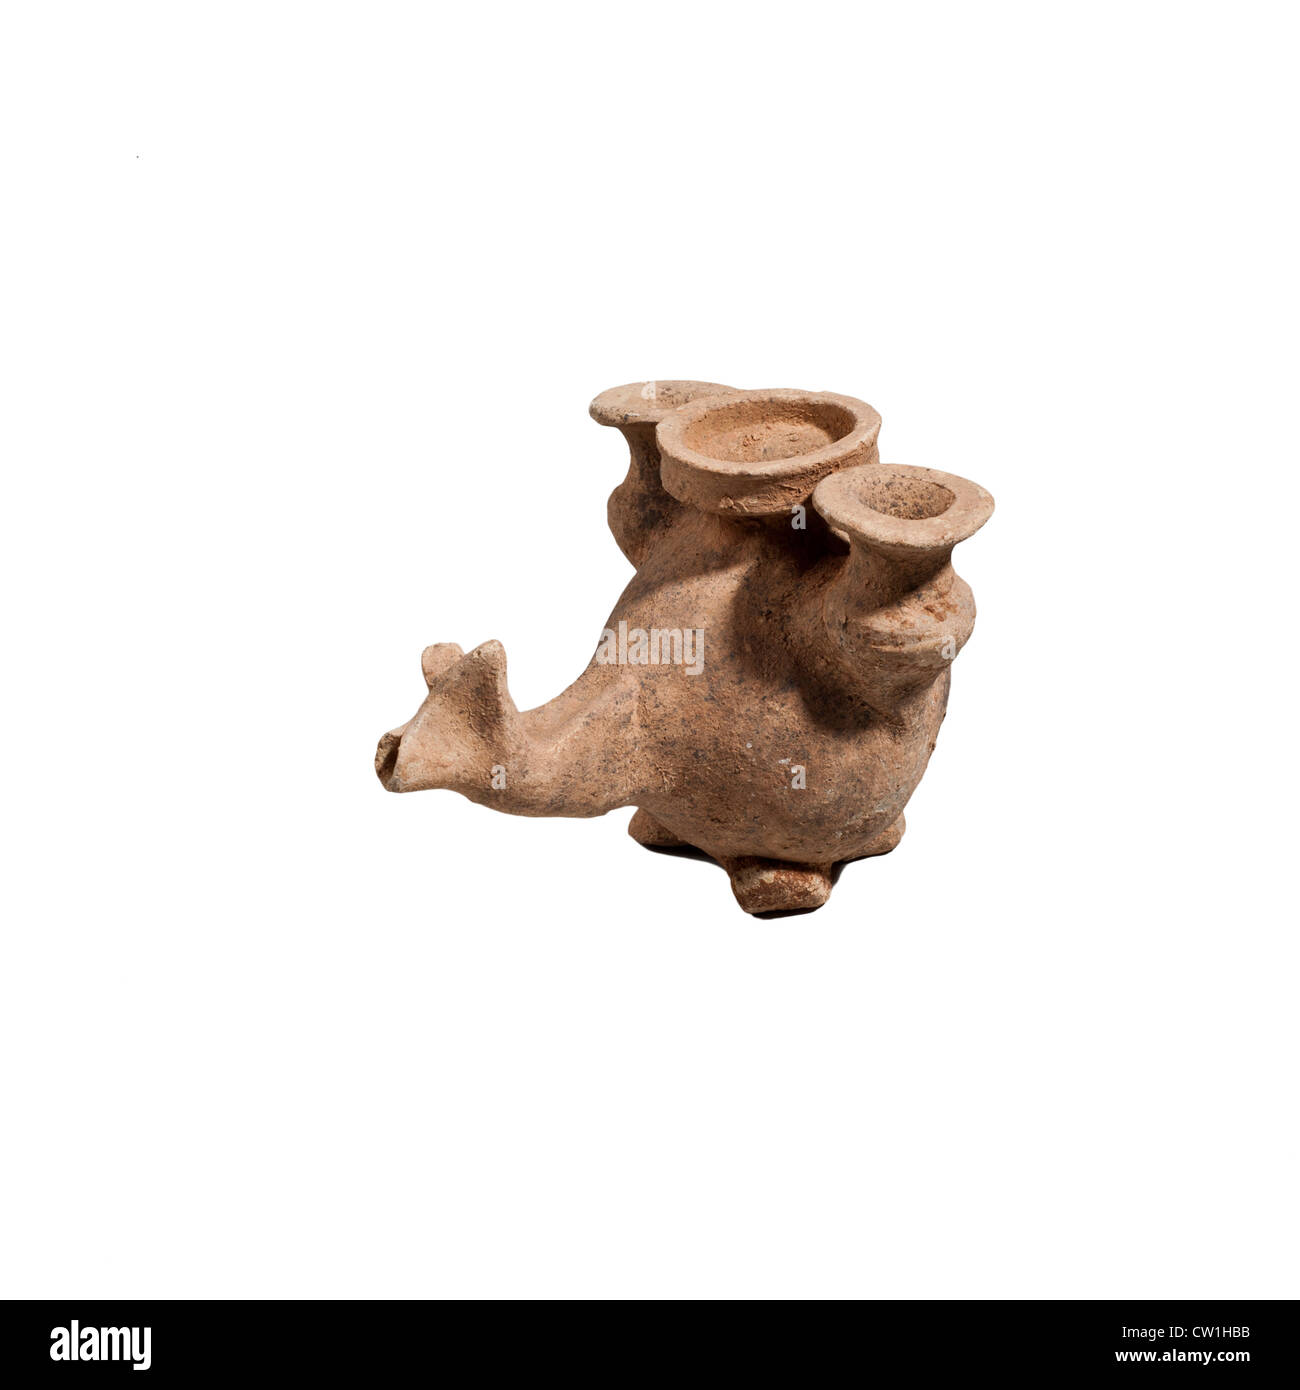 https://c8.alamy.com/comp/CW1HBB/a-nebatean-terracotta-vessel-in-the-shape-of-an-animal-carrying-two-CW1HBB.jpg